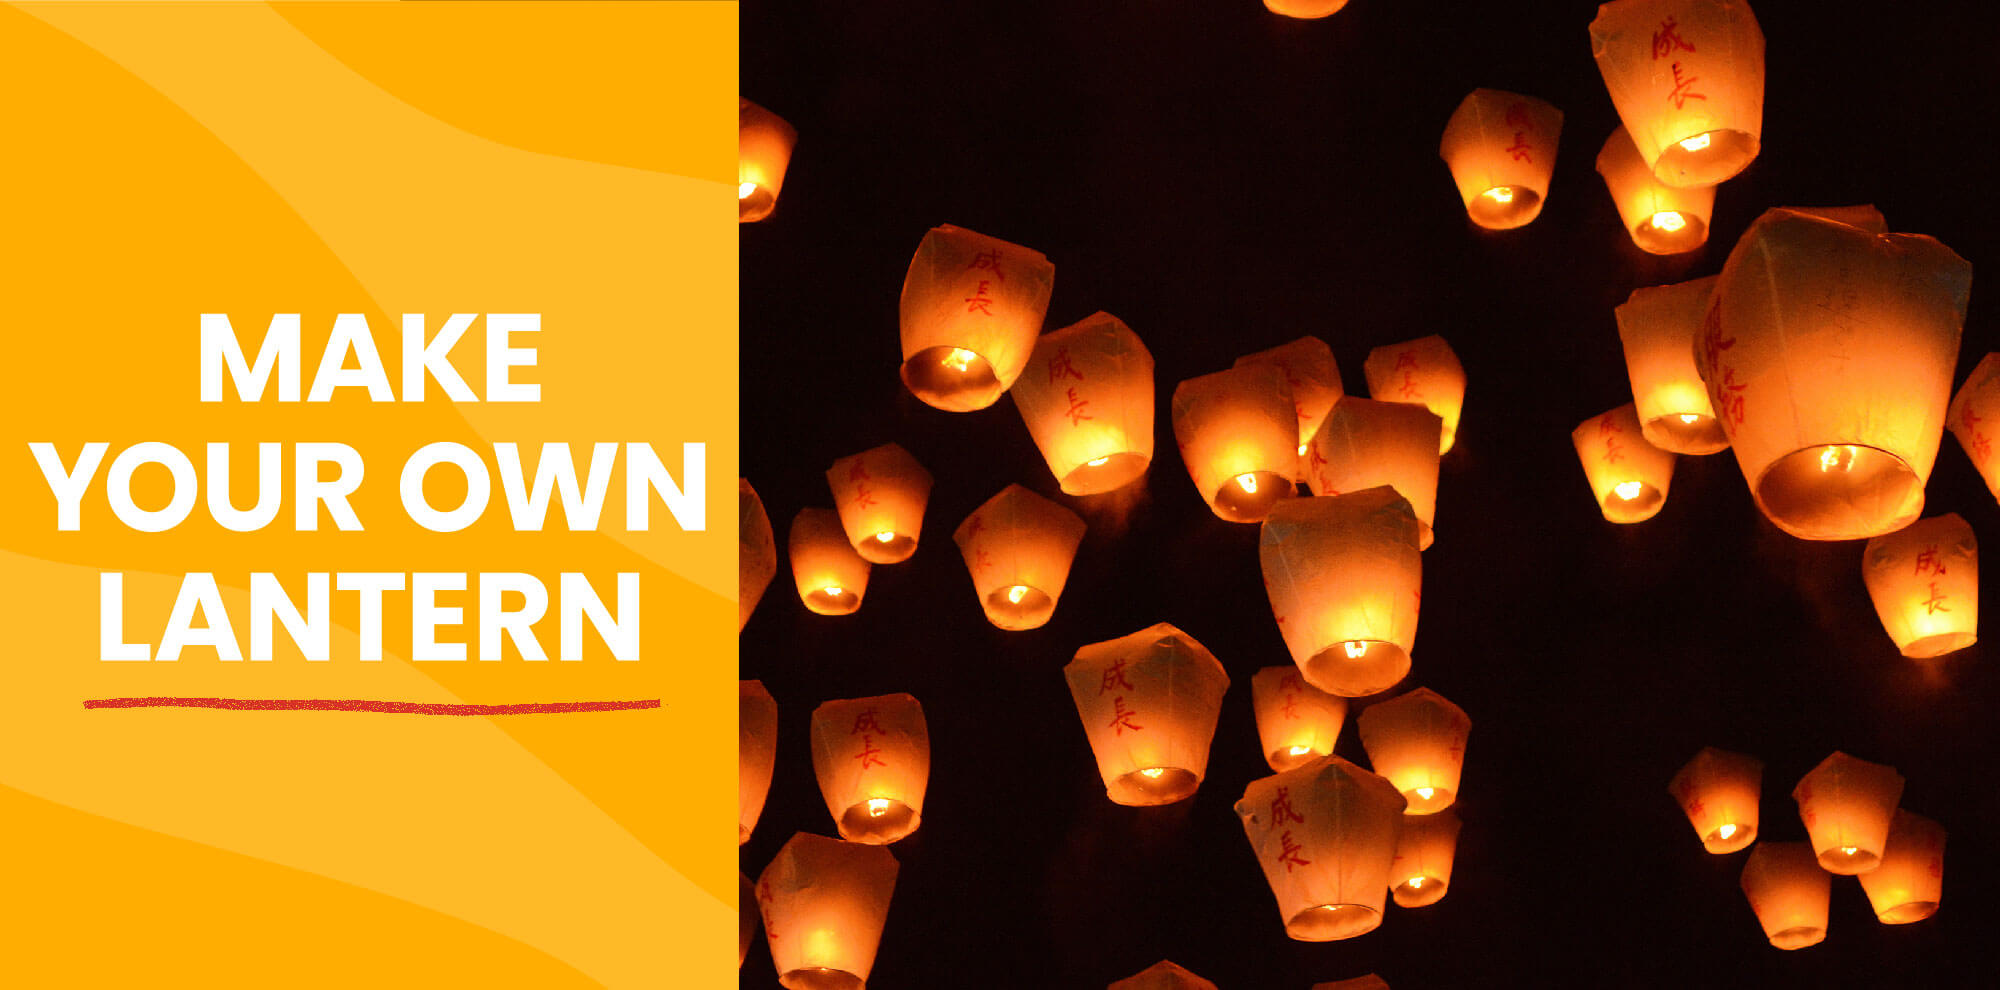 Chinese Lanterns: Culture and How to Make in 5 Steps